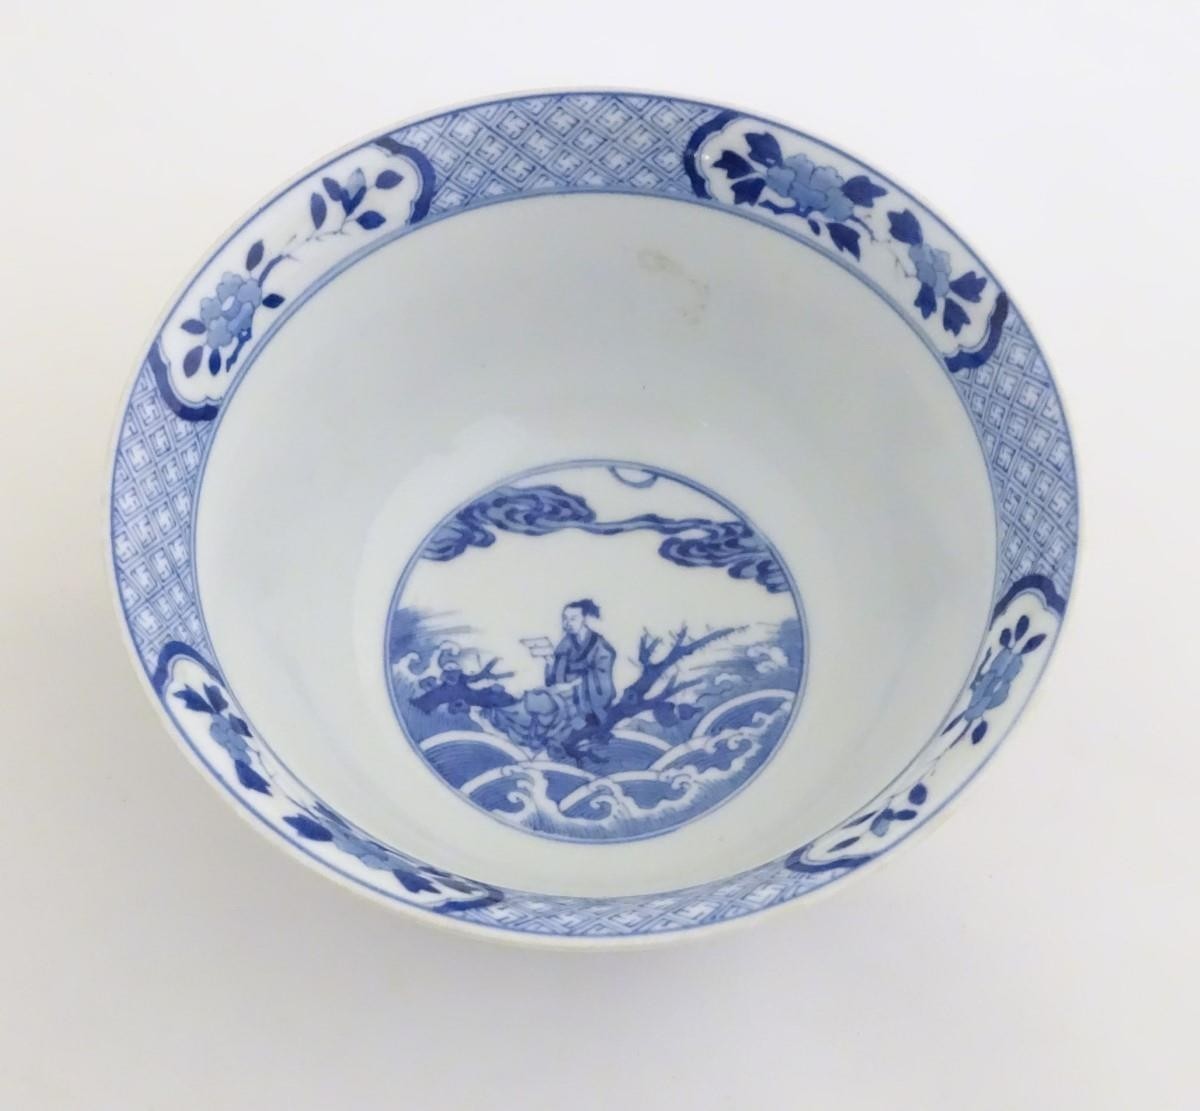 A Chinese blue and white footed bowl with a flared rim, decorated with a scene depicting the - Image 3 of 8